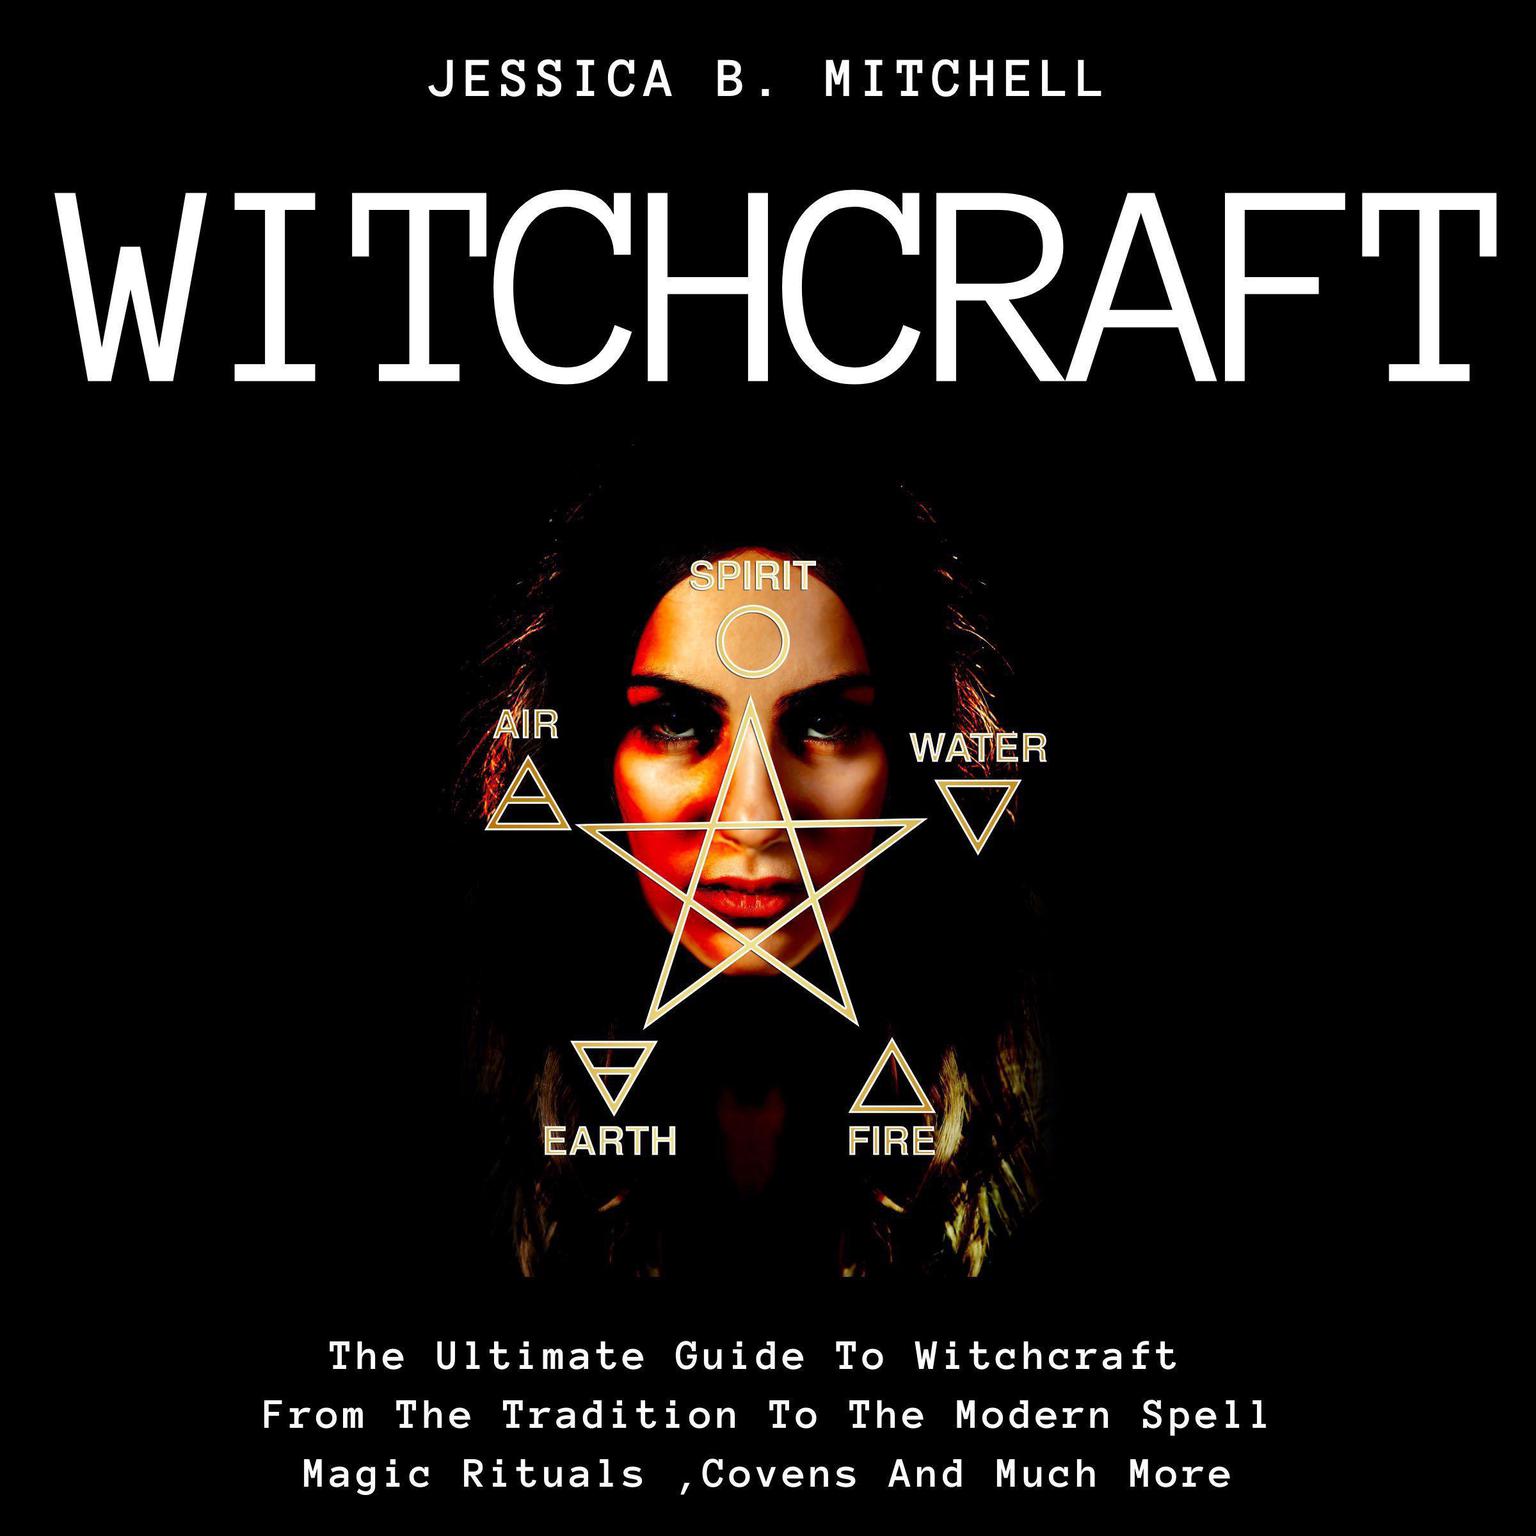 Witchcraft The Ultimate Guide To Witchcraft , From The Tradition To The Modern Spell,Magic Rituals ,Covens And Much More Audiobook, by Jessica B. Mitchell